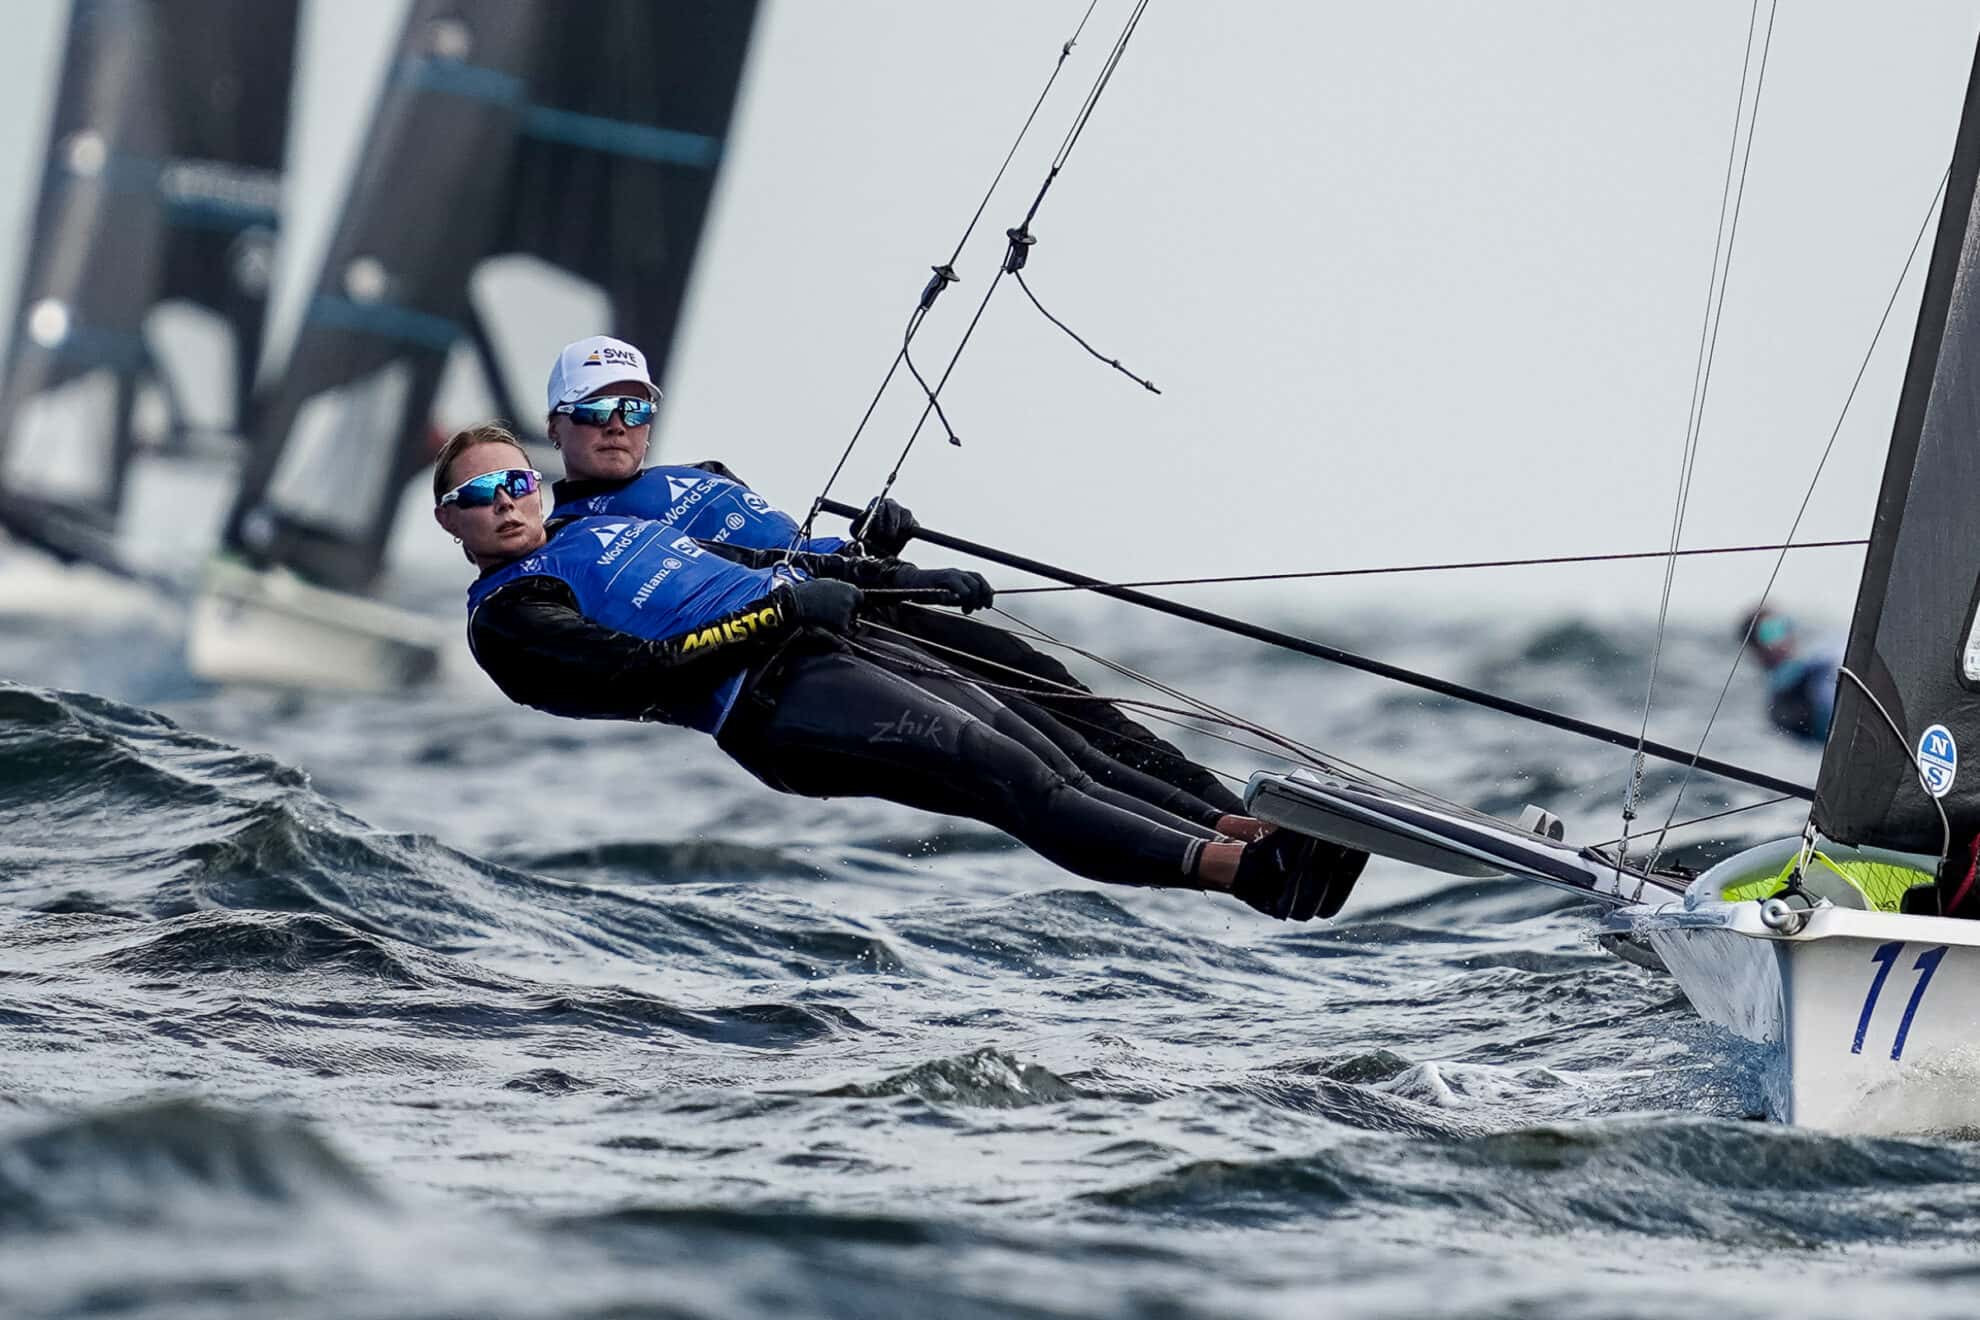 Bobeck and Netzler star in 49erFX on day two of Sailing World Championships